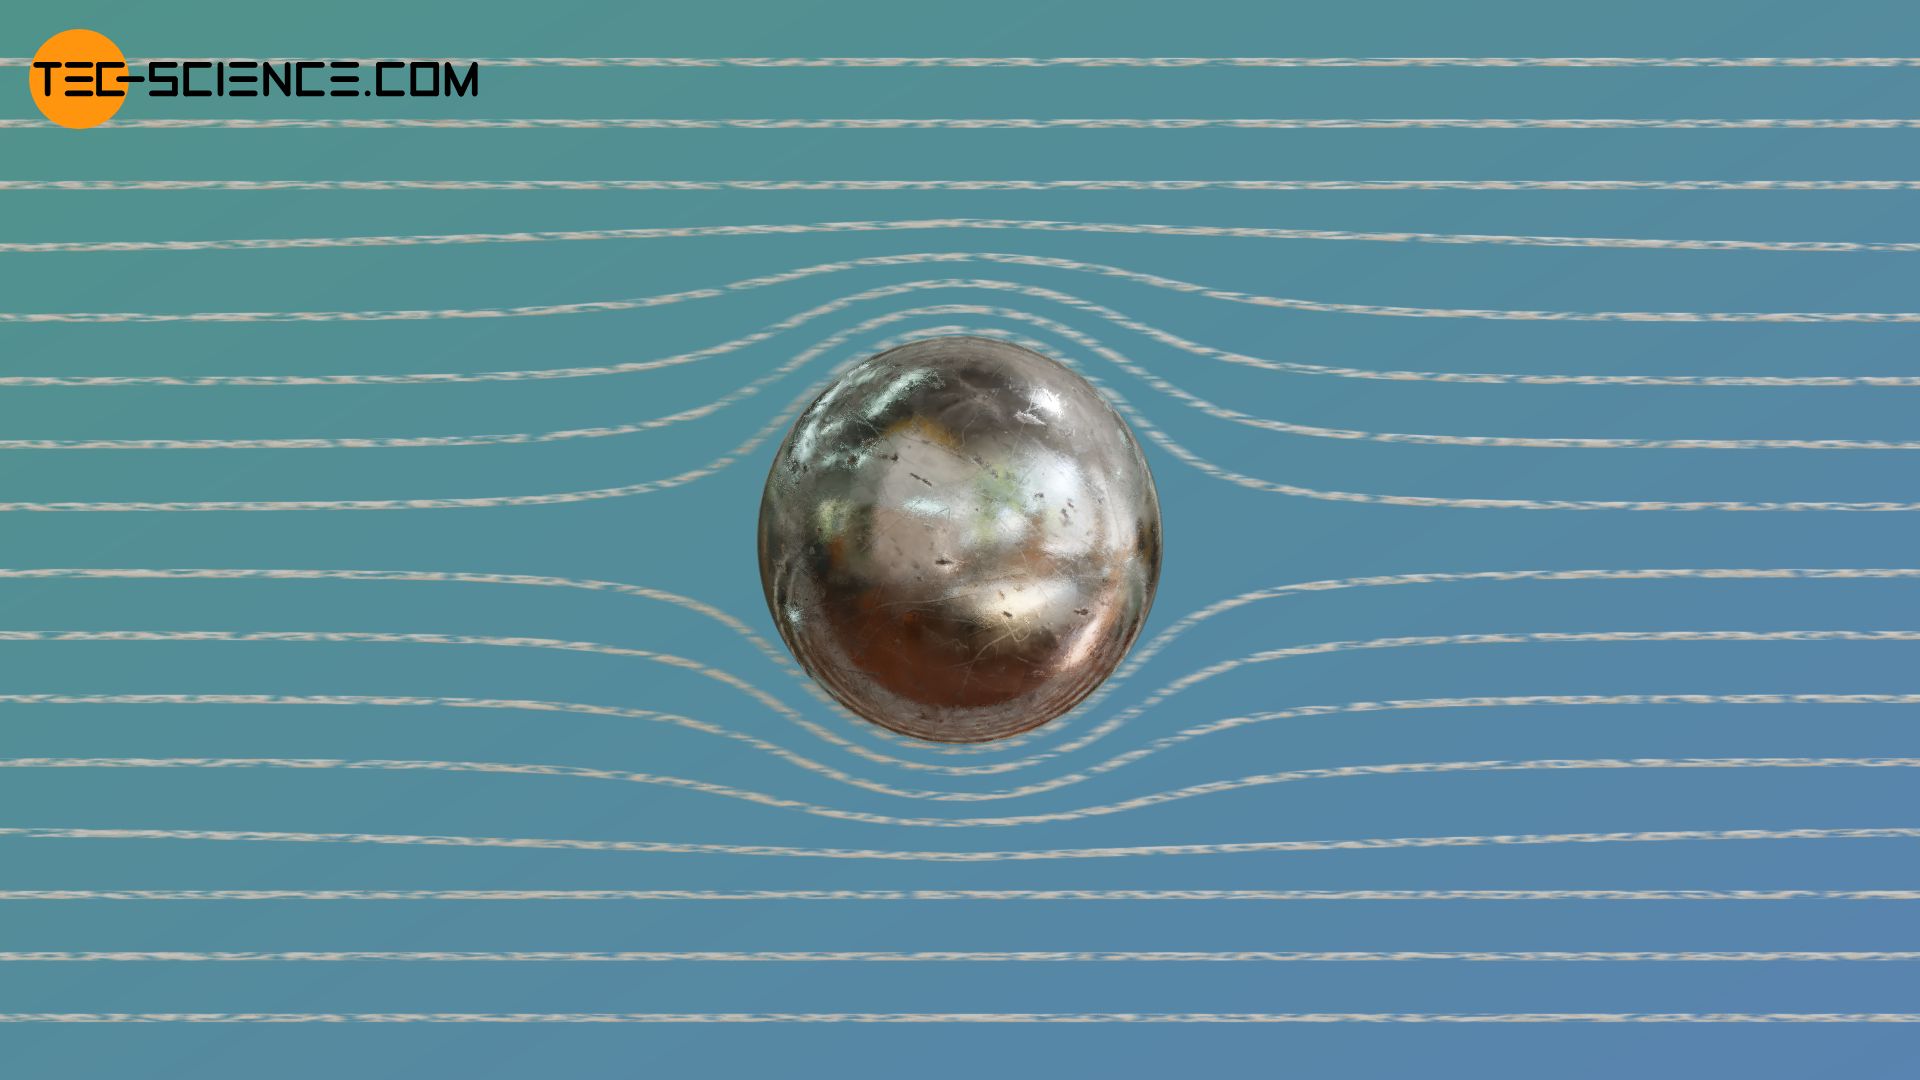 Completely laminar flow around a sphere